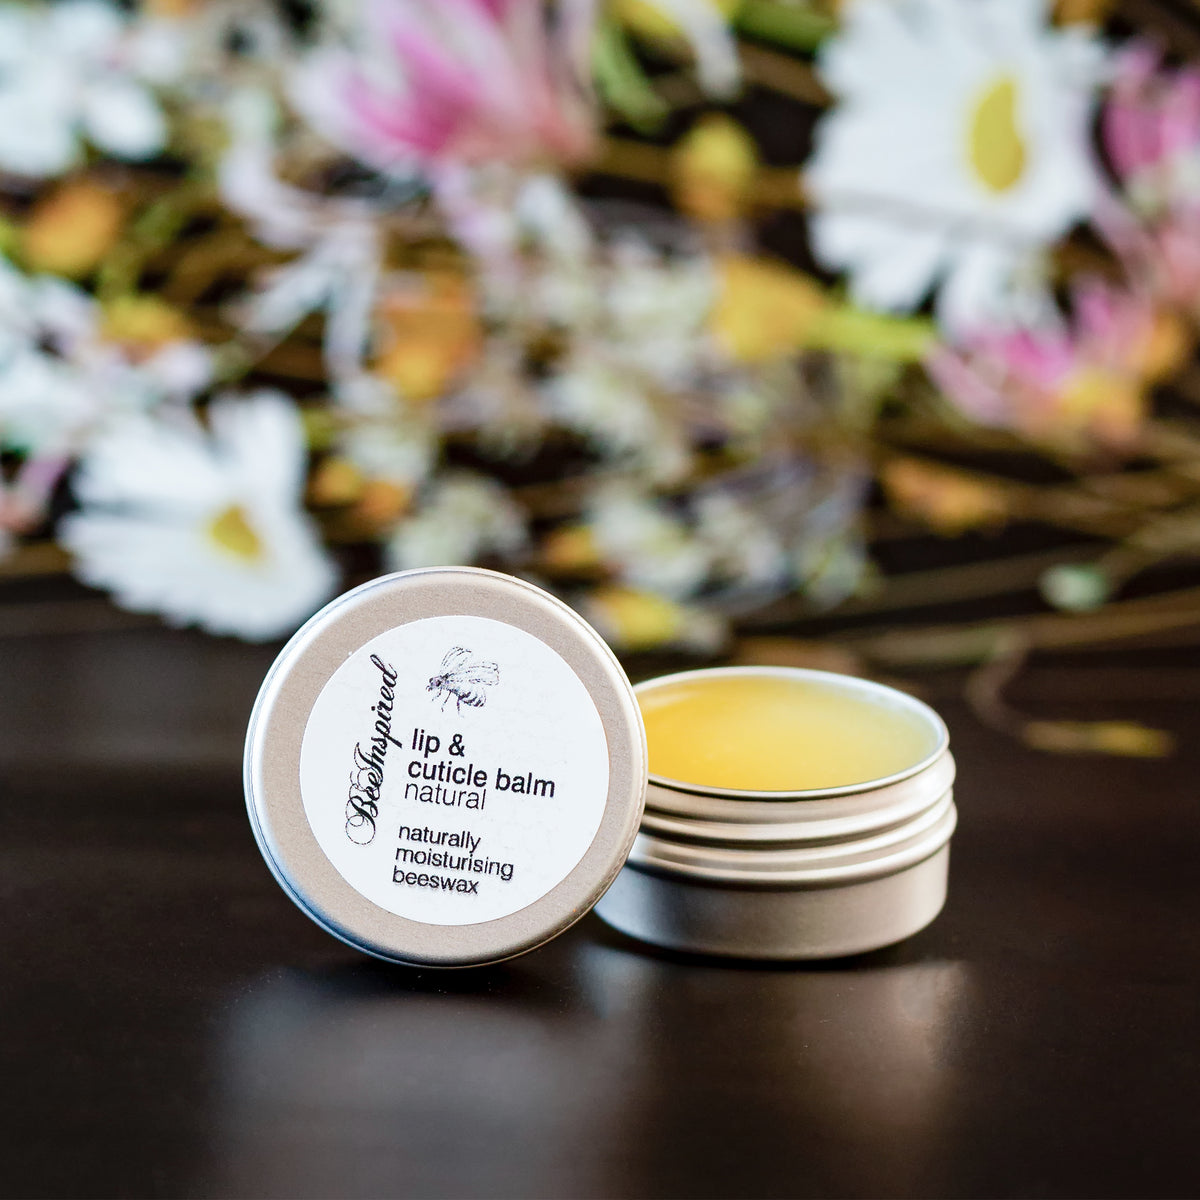 natural lip & cuticle balm - the simplest and most effective combination